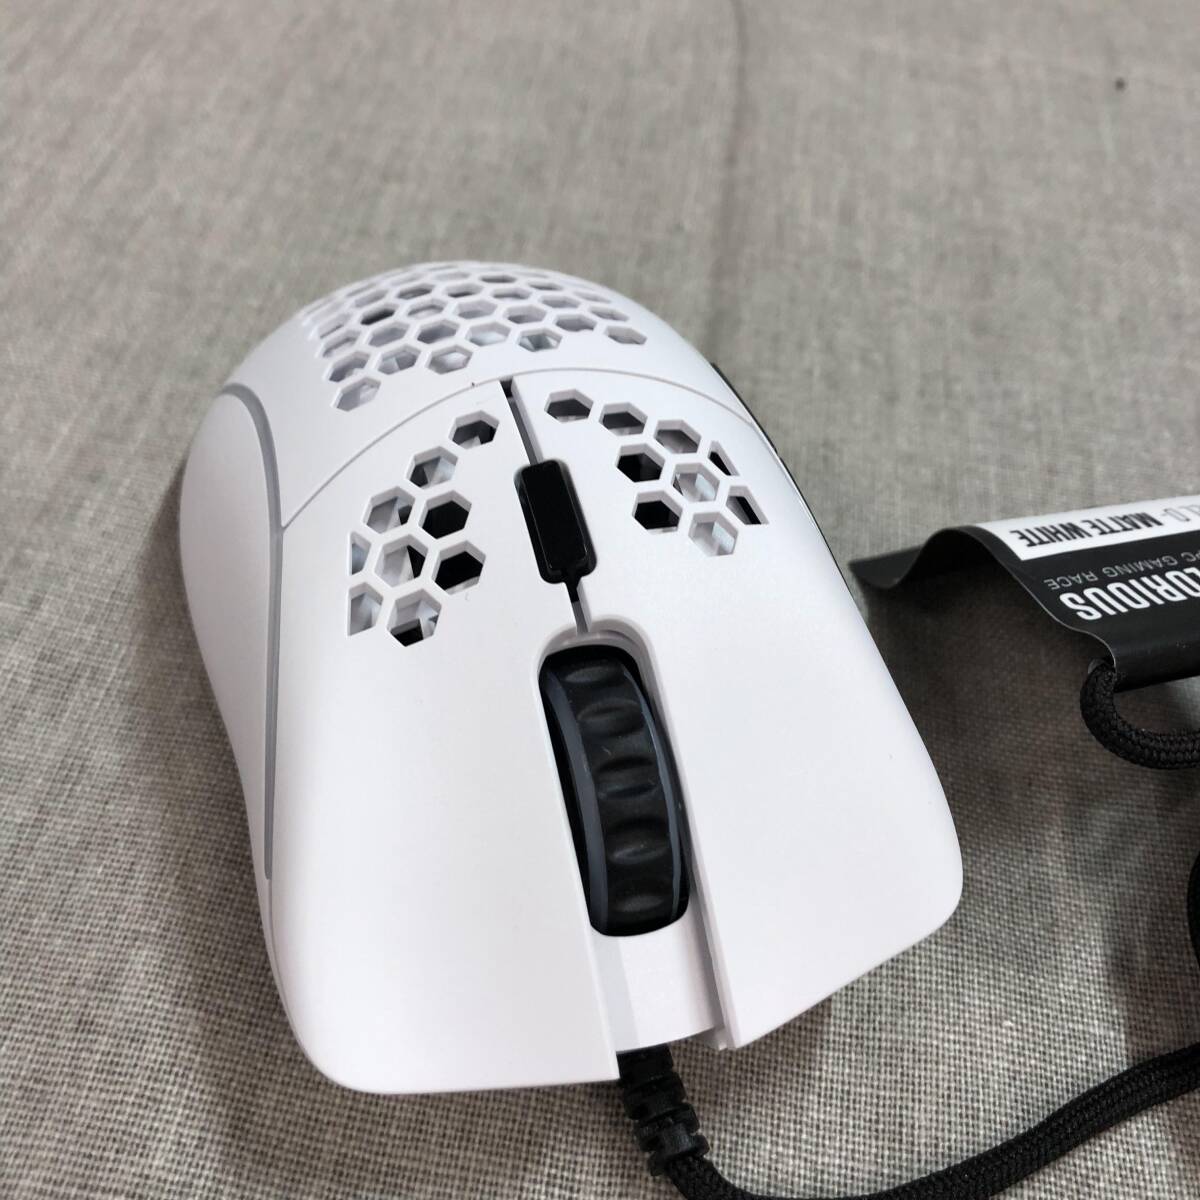 Glorious PC Gaming Race Gloria s model dge-ming mouse white mouse wire small size RGB shines GLO-MS-DM-MW